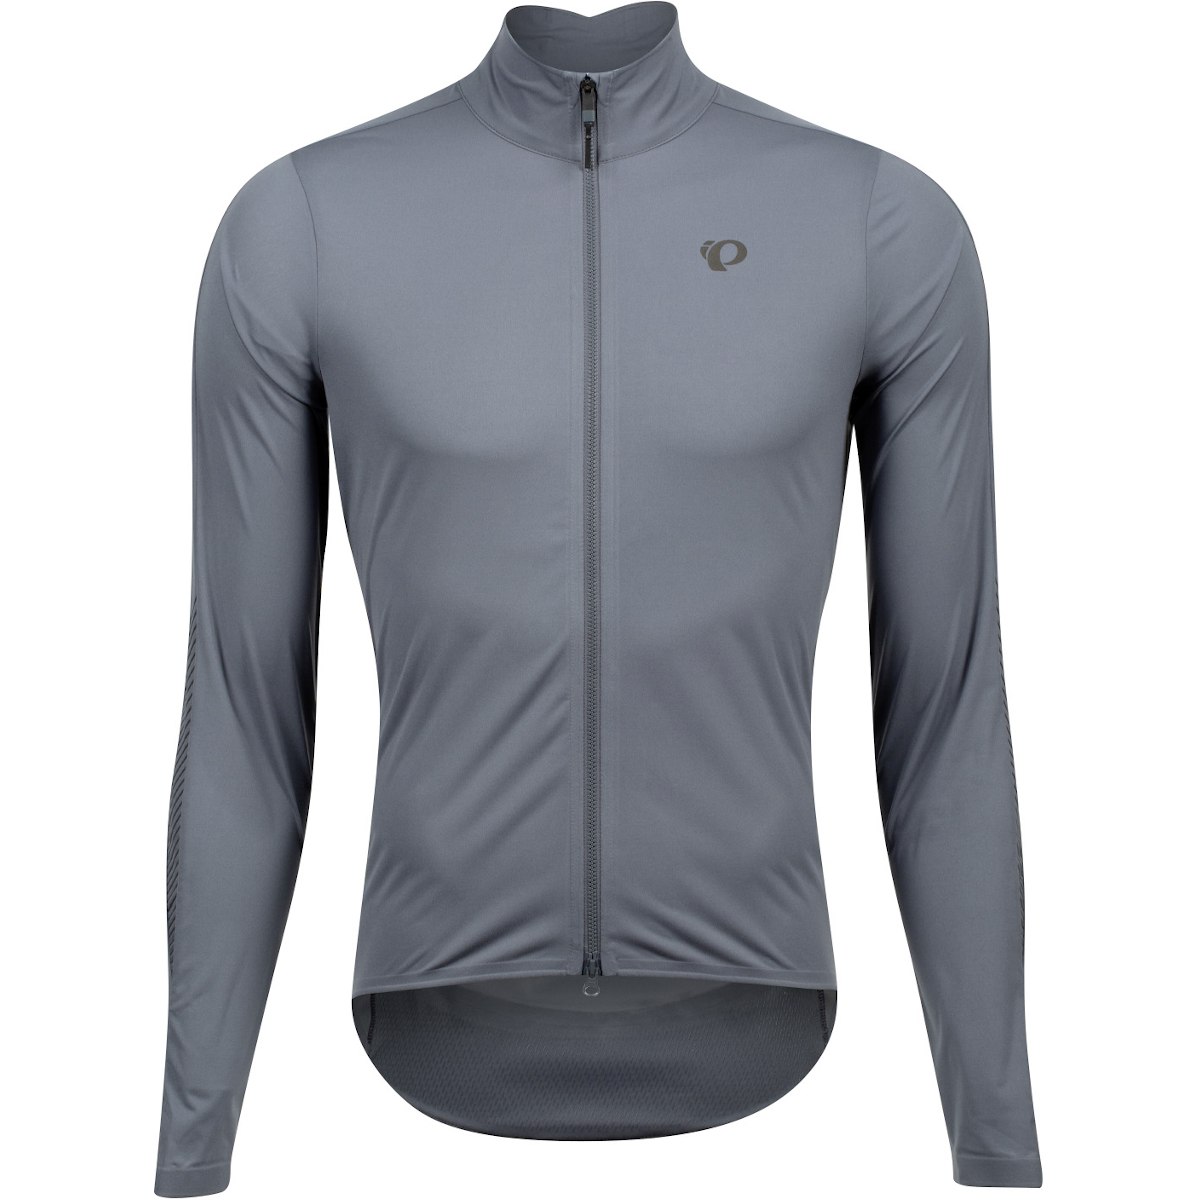 Picture of PEARL iZUMi P.R.O. Barrier Jacket 11132004 - turbulence - 6RM